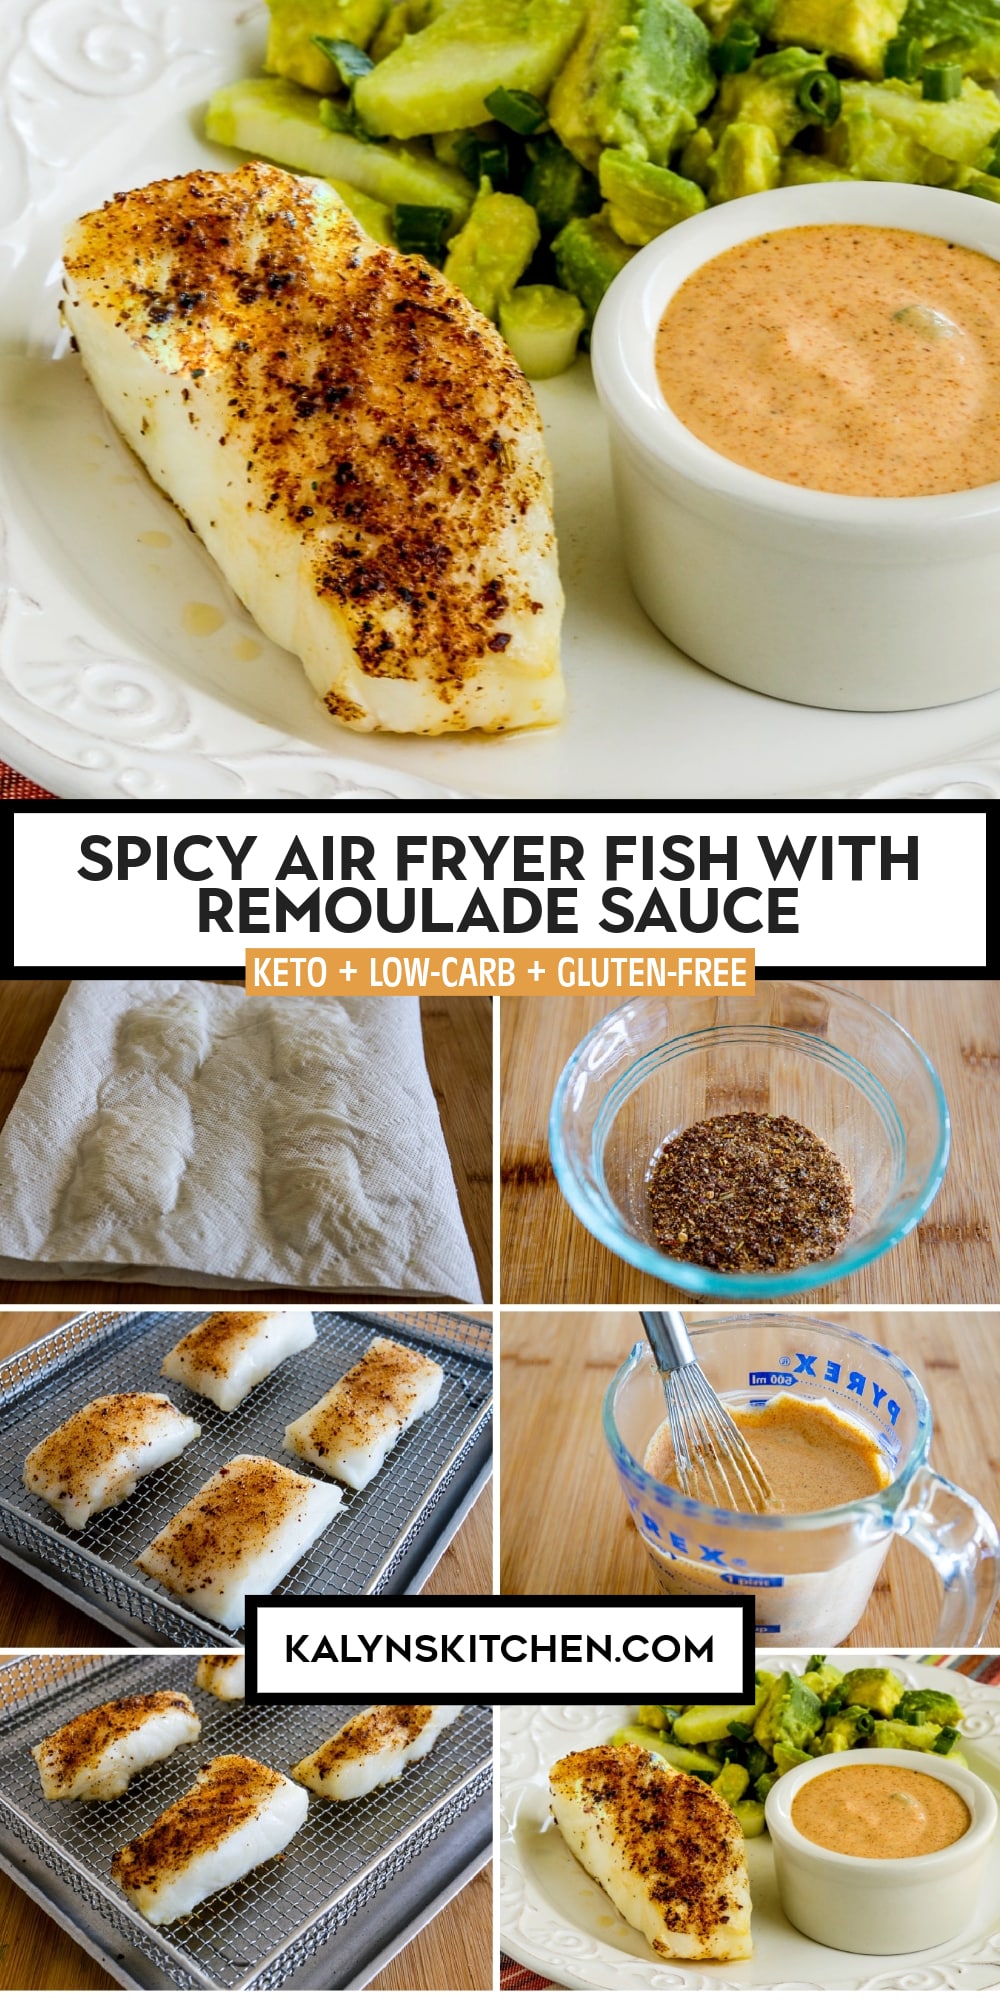 Pinterest image of Spicy Air Fryer Fish with Remoulade Sauce